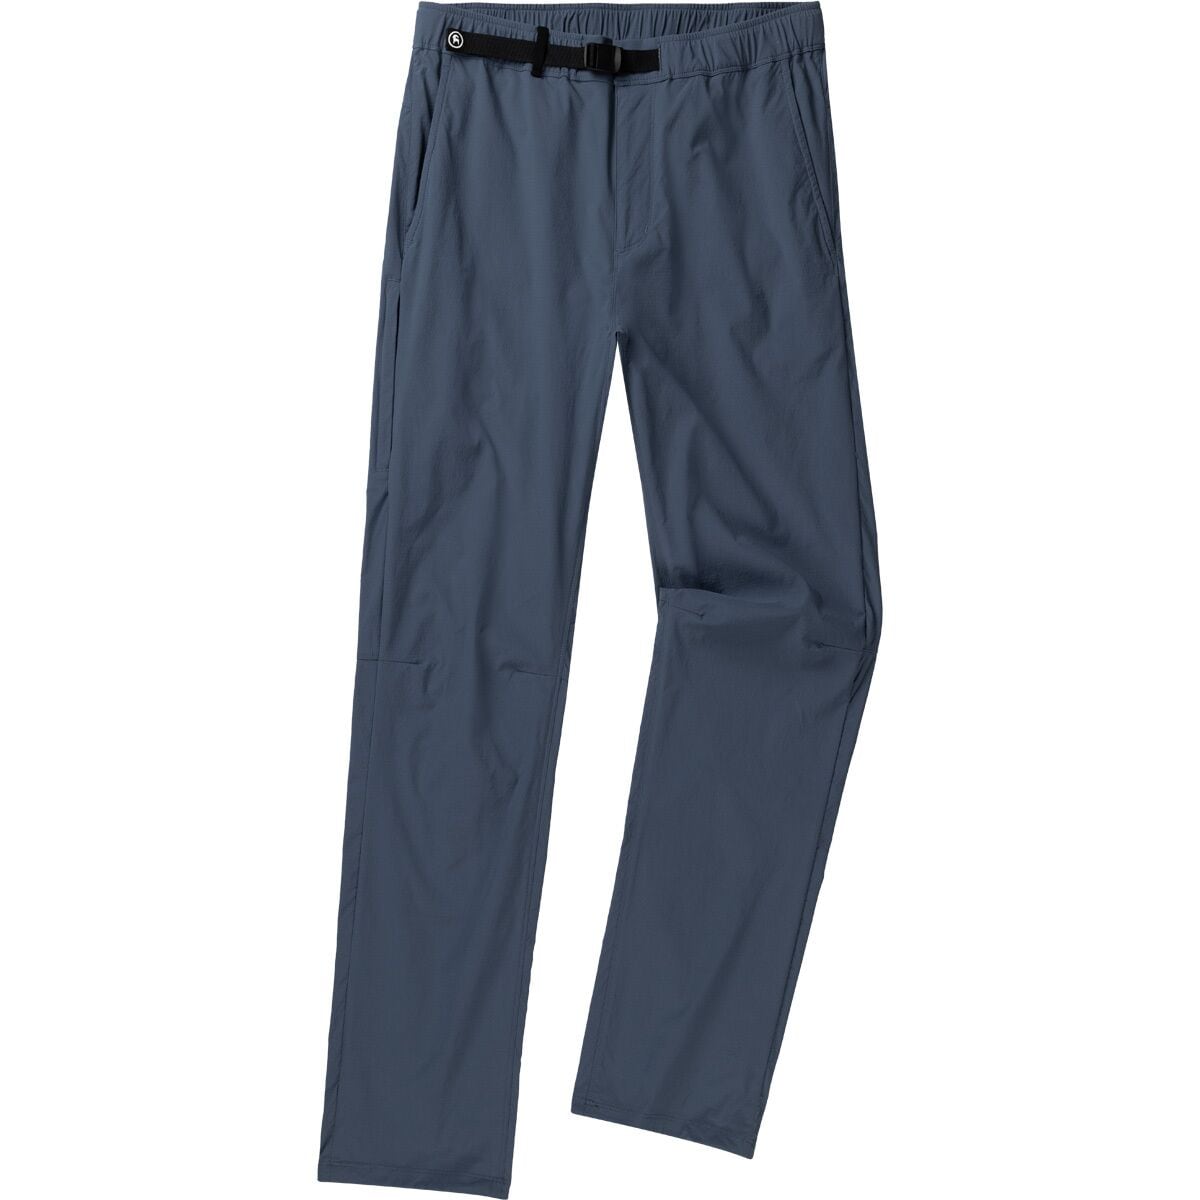 Backcountry Wasatch Ripstop Pant - Men's